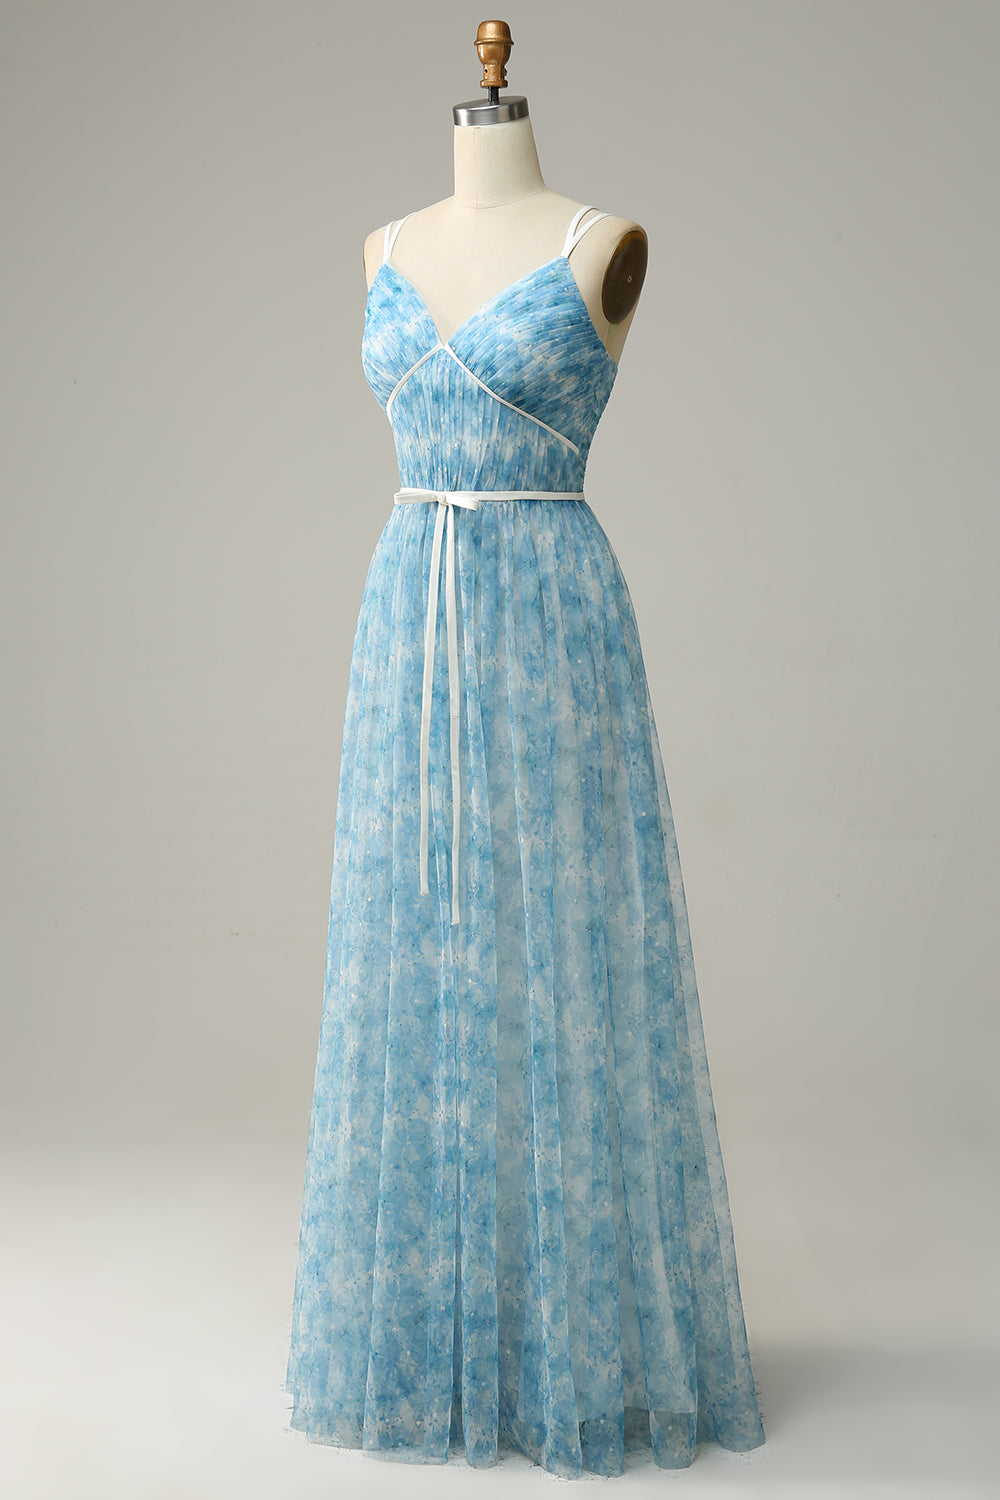 Blue Printed A-Line Tulle Long Bridesmaid Dress